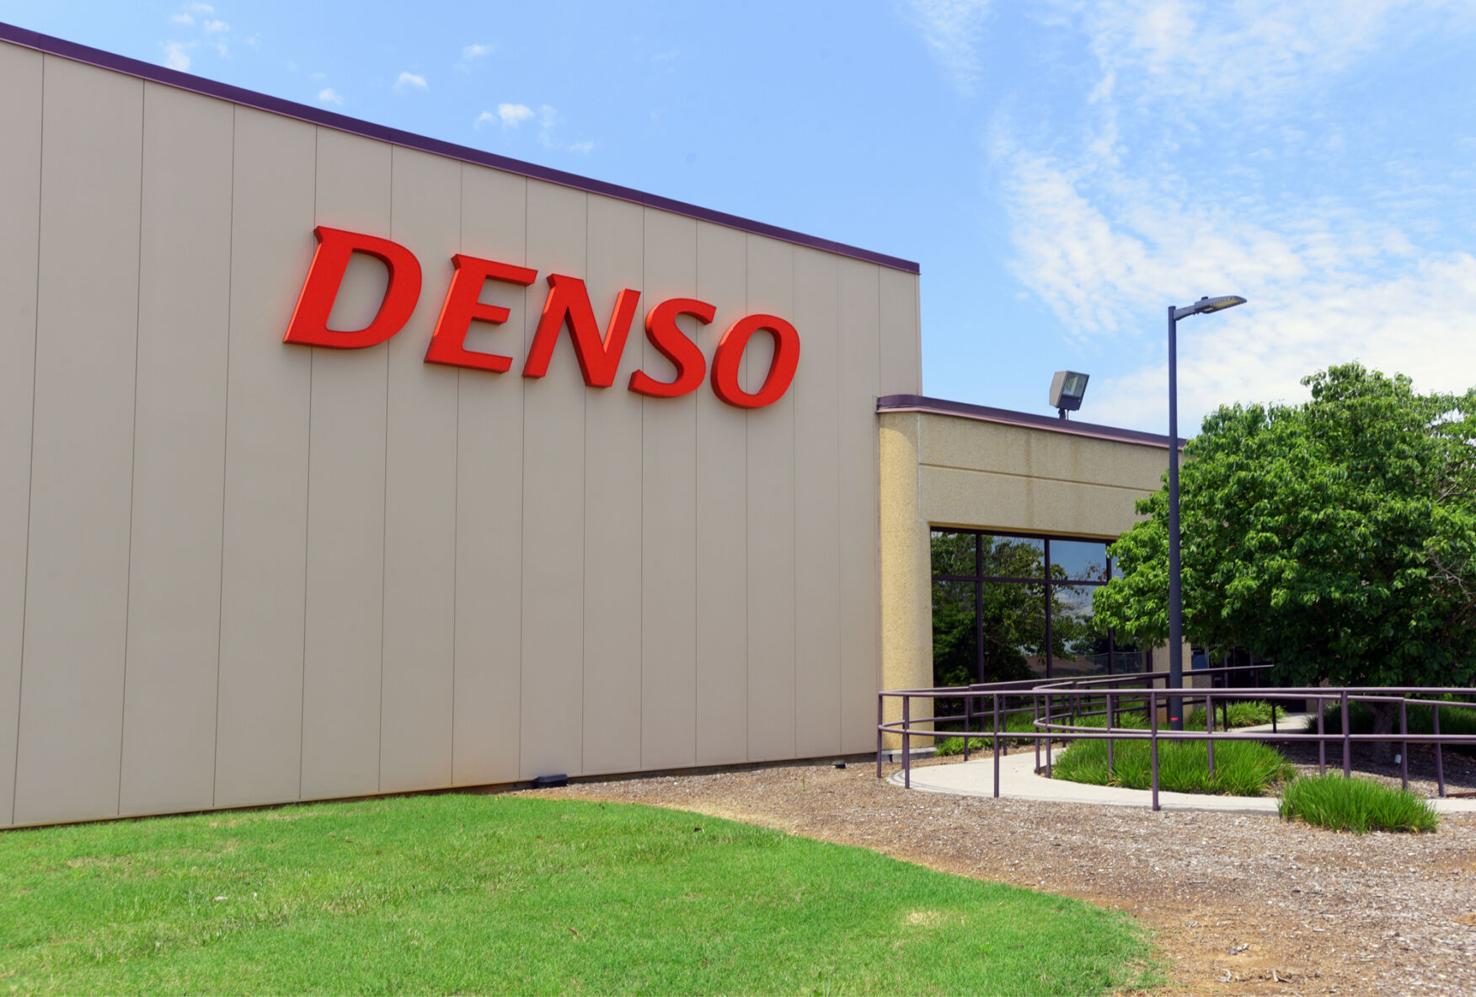 DENSO in Maryville is 11 million closer to an EV